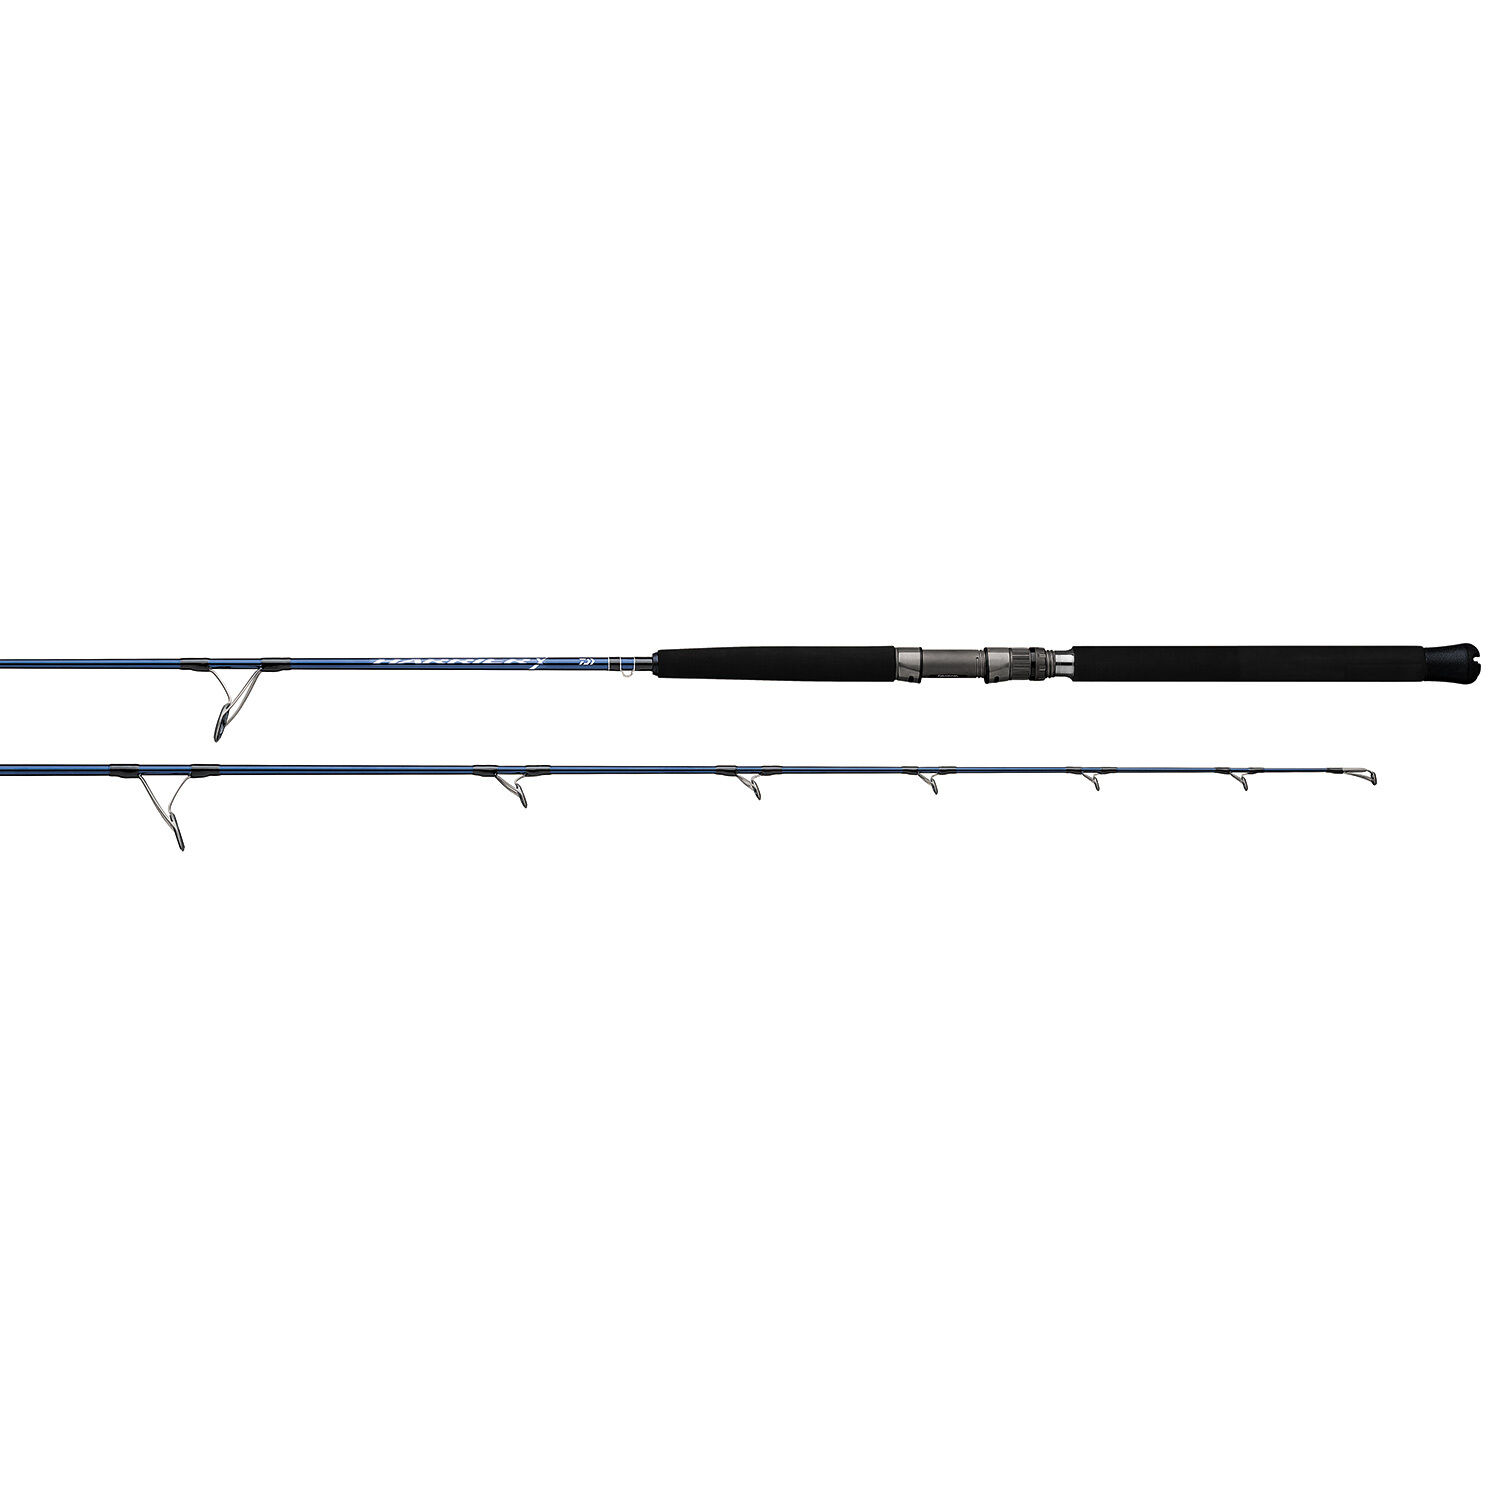 Daiwa Harrier Pole Sections no 6 8and 9 butt sections 